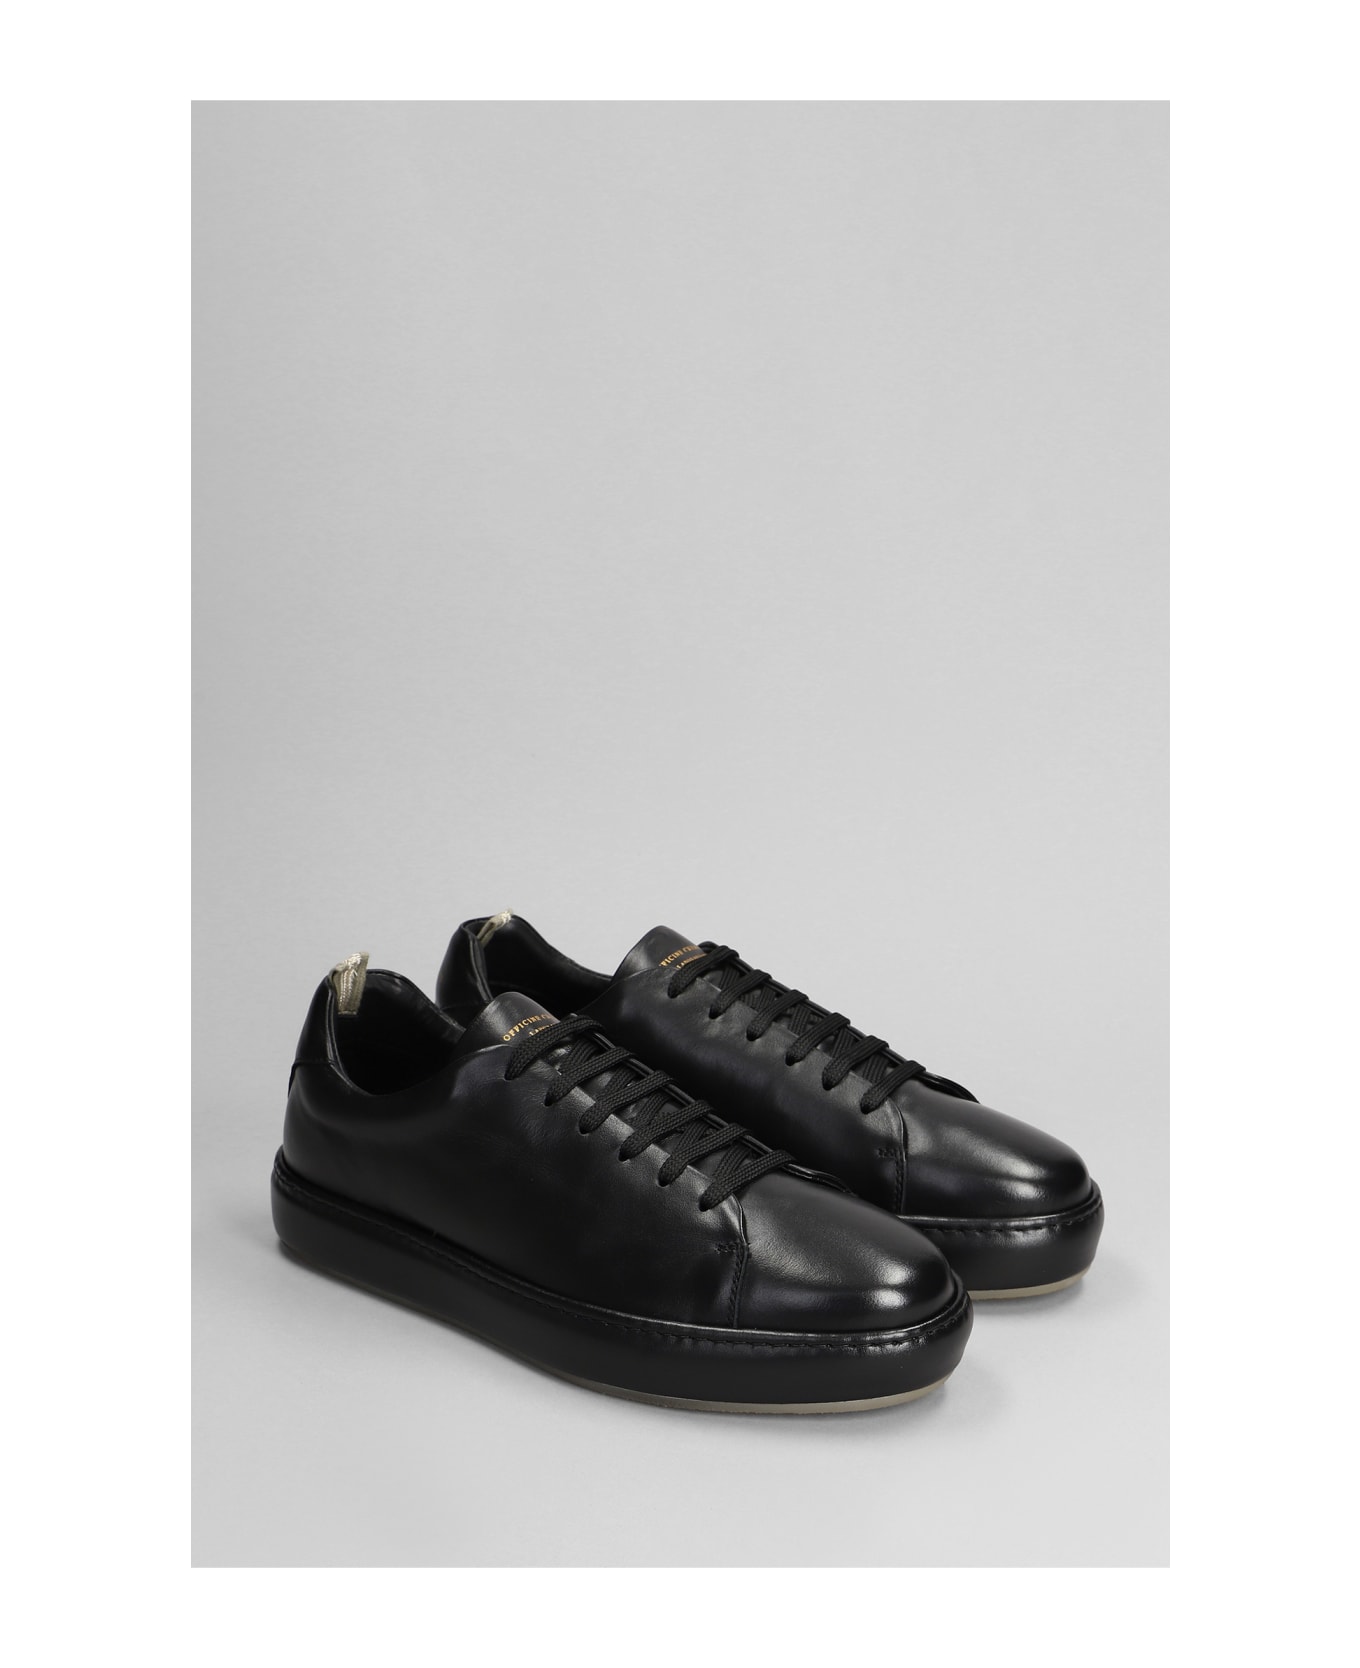 Officine Creative Covered 001 Sneakers In Black Leather - black